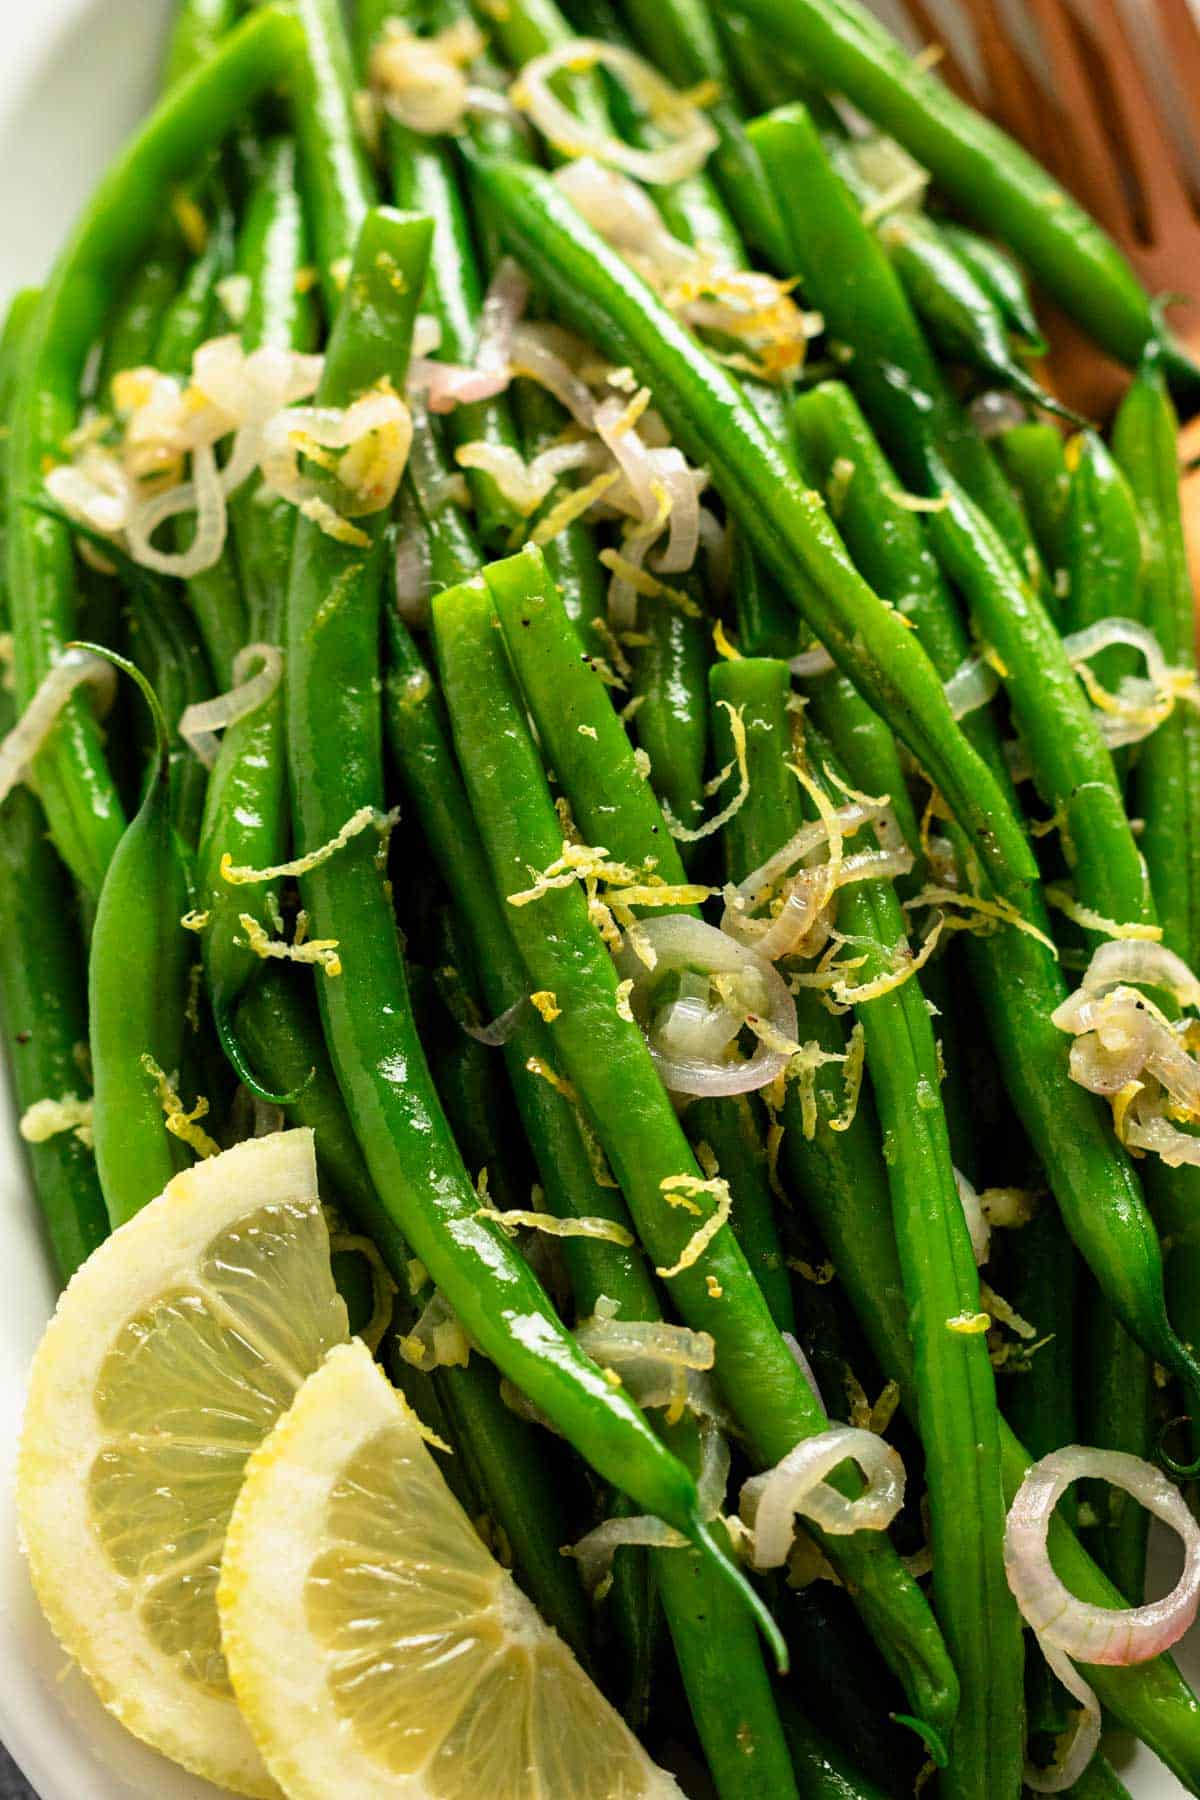 ready to be served garnished green beans with lemon slices.